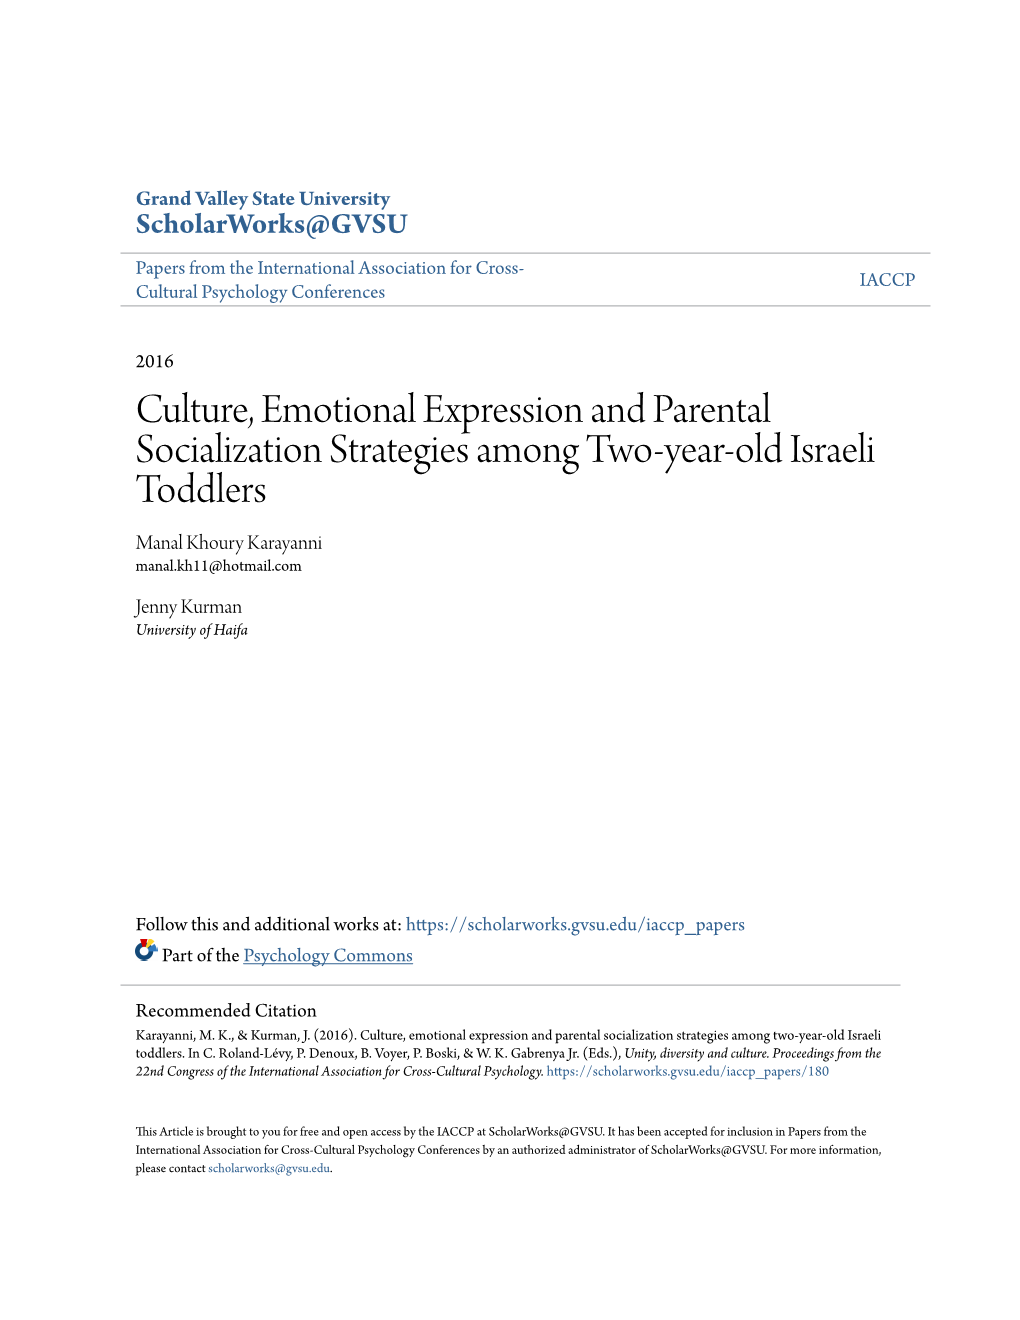 Culture, Emotional Expression and Parental Socialization Strategies Among Two-Year-Old Israeli Toddlers Manal Khoury Karayanni Manal.Kh11@Hotmail.Com